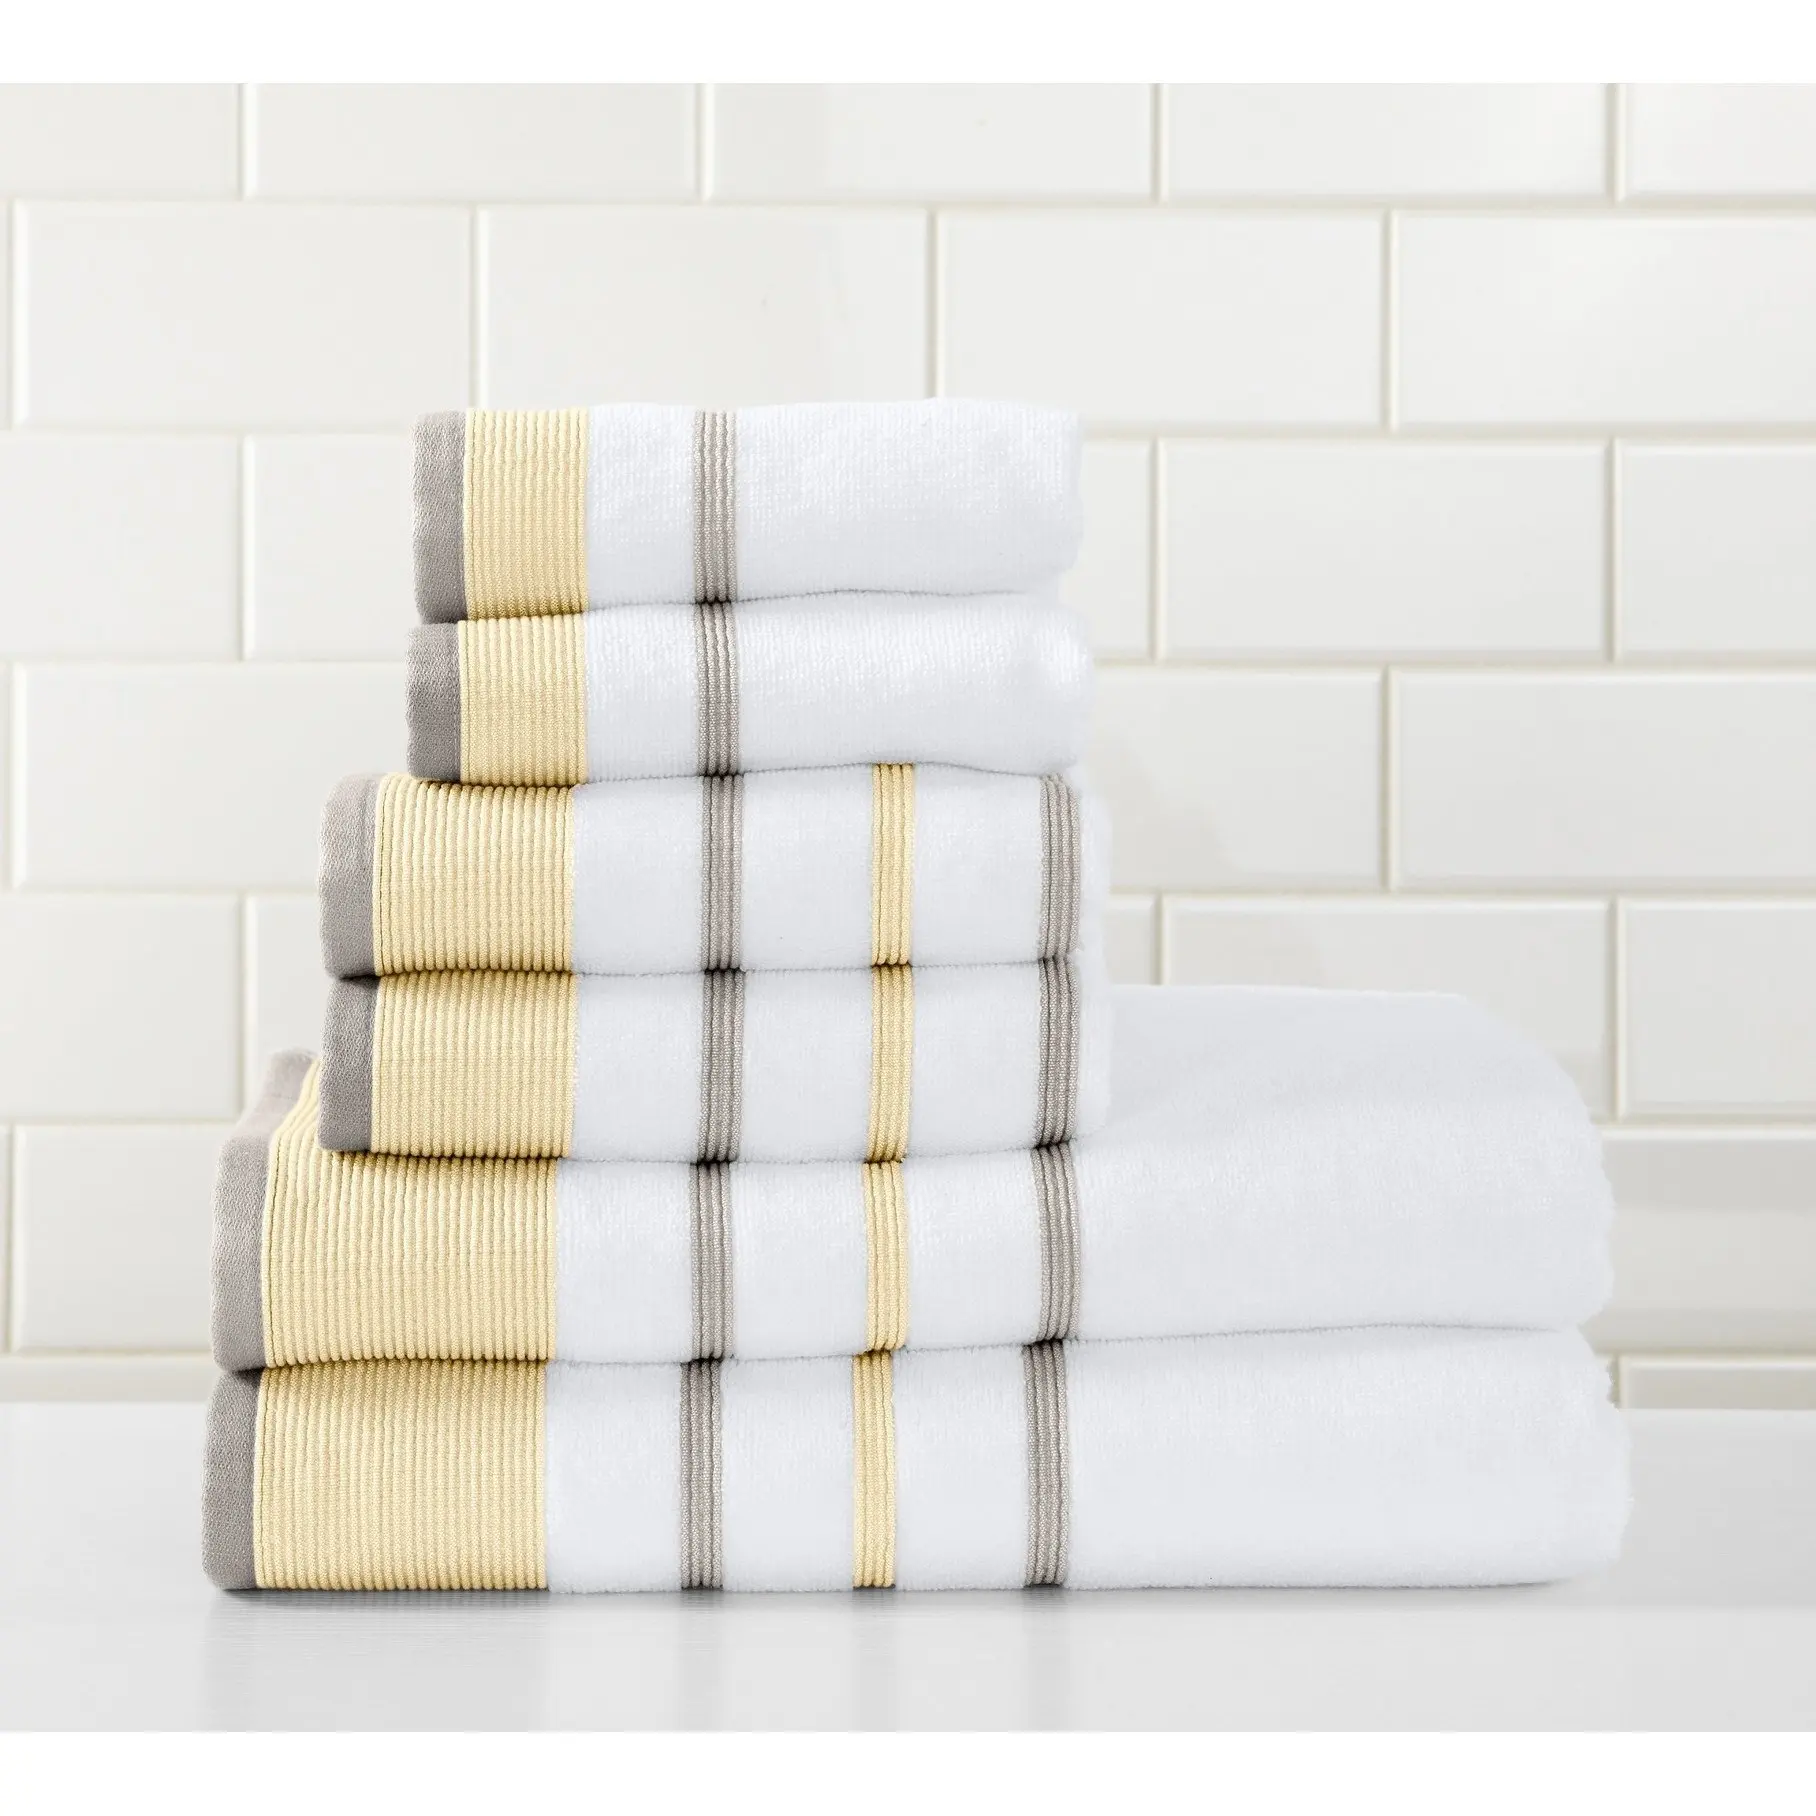 What Colour Towels With Grey And White Bathroom - BEST HOME DESIGN IDEAS